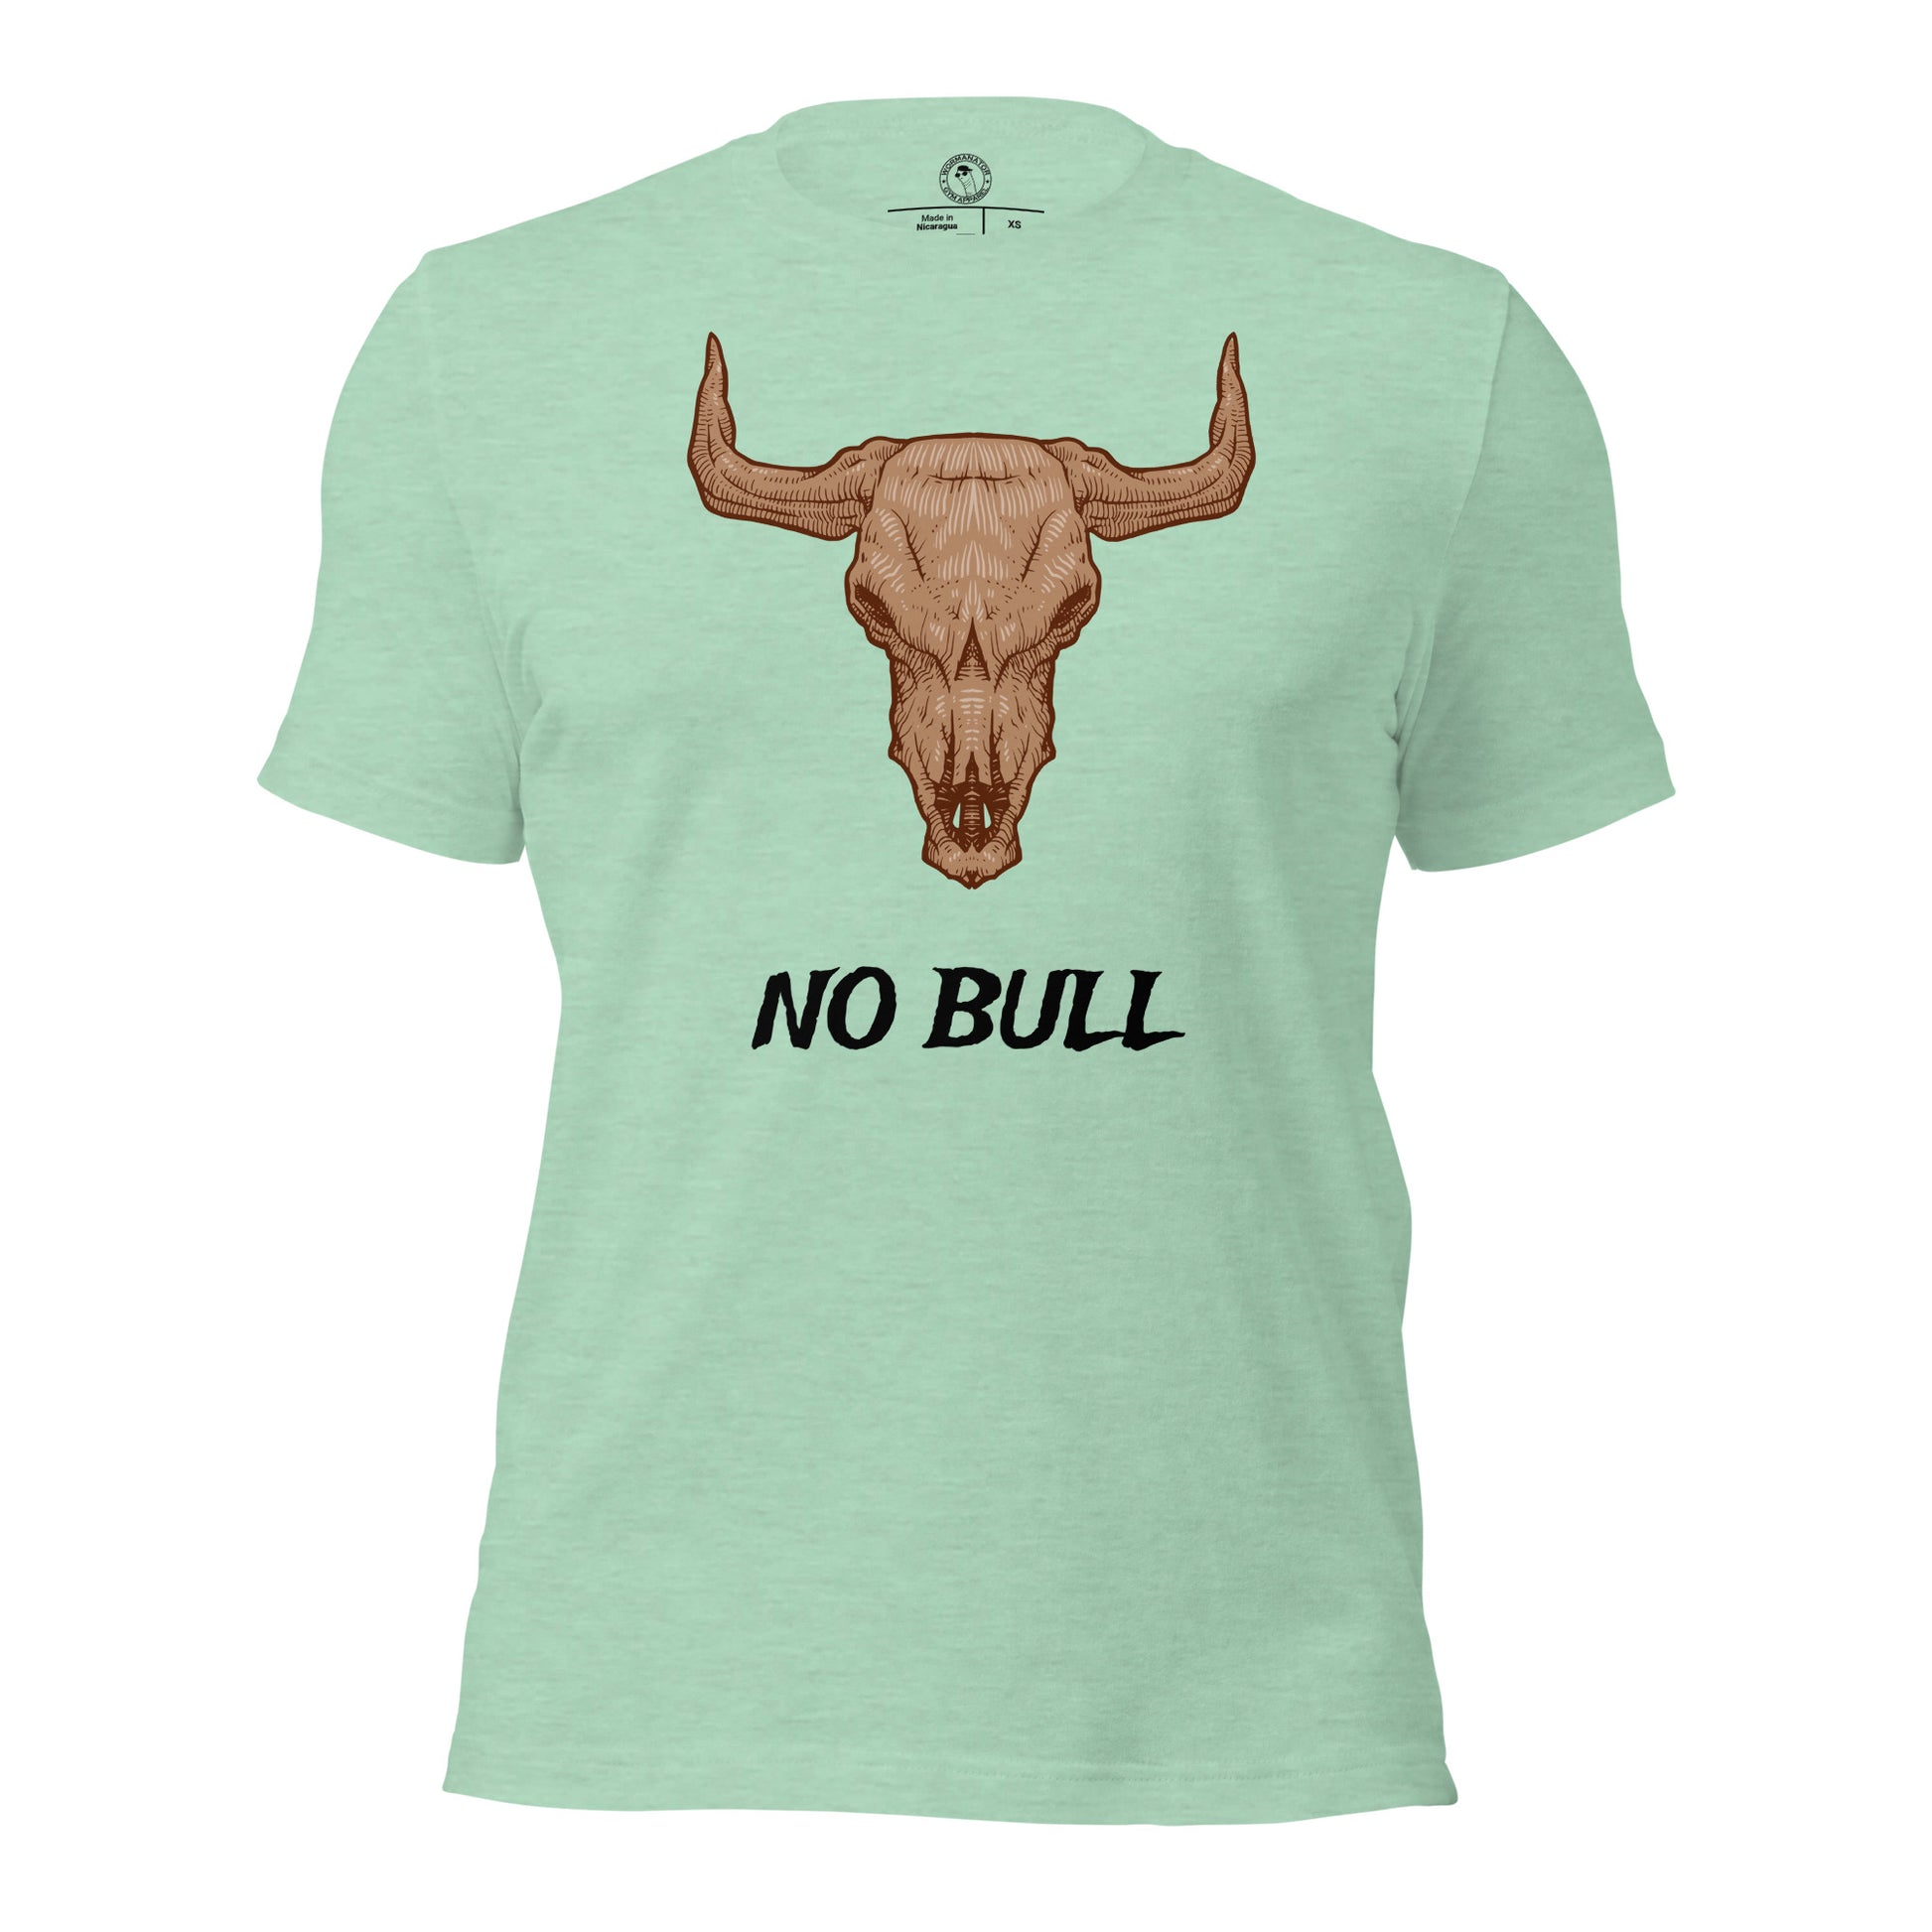 No Bull Shirt in Heather Prism Mint